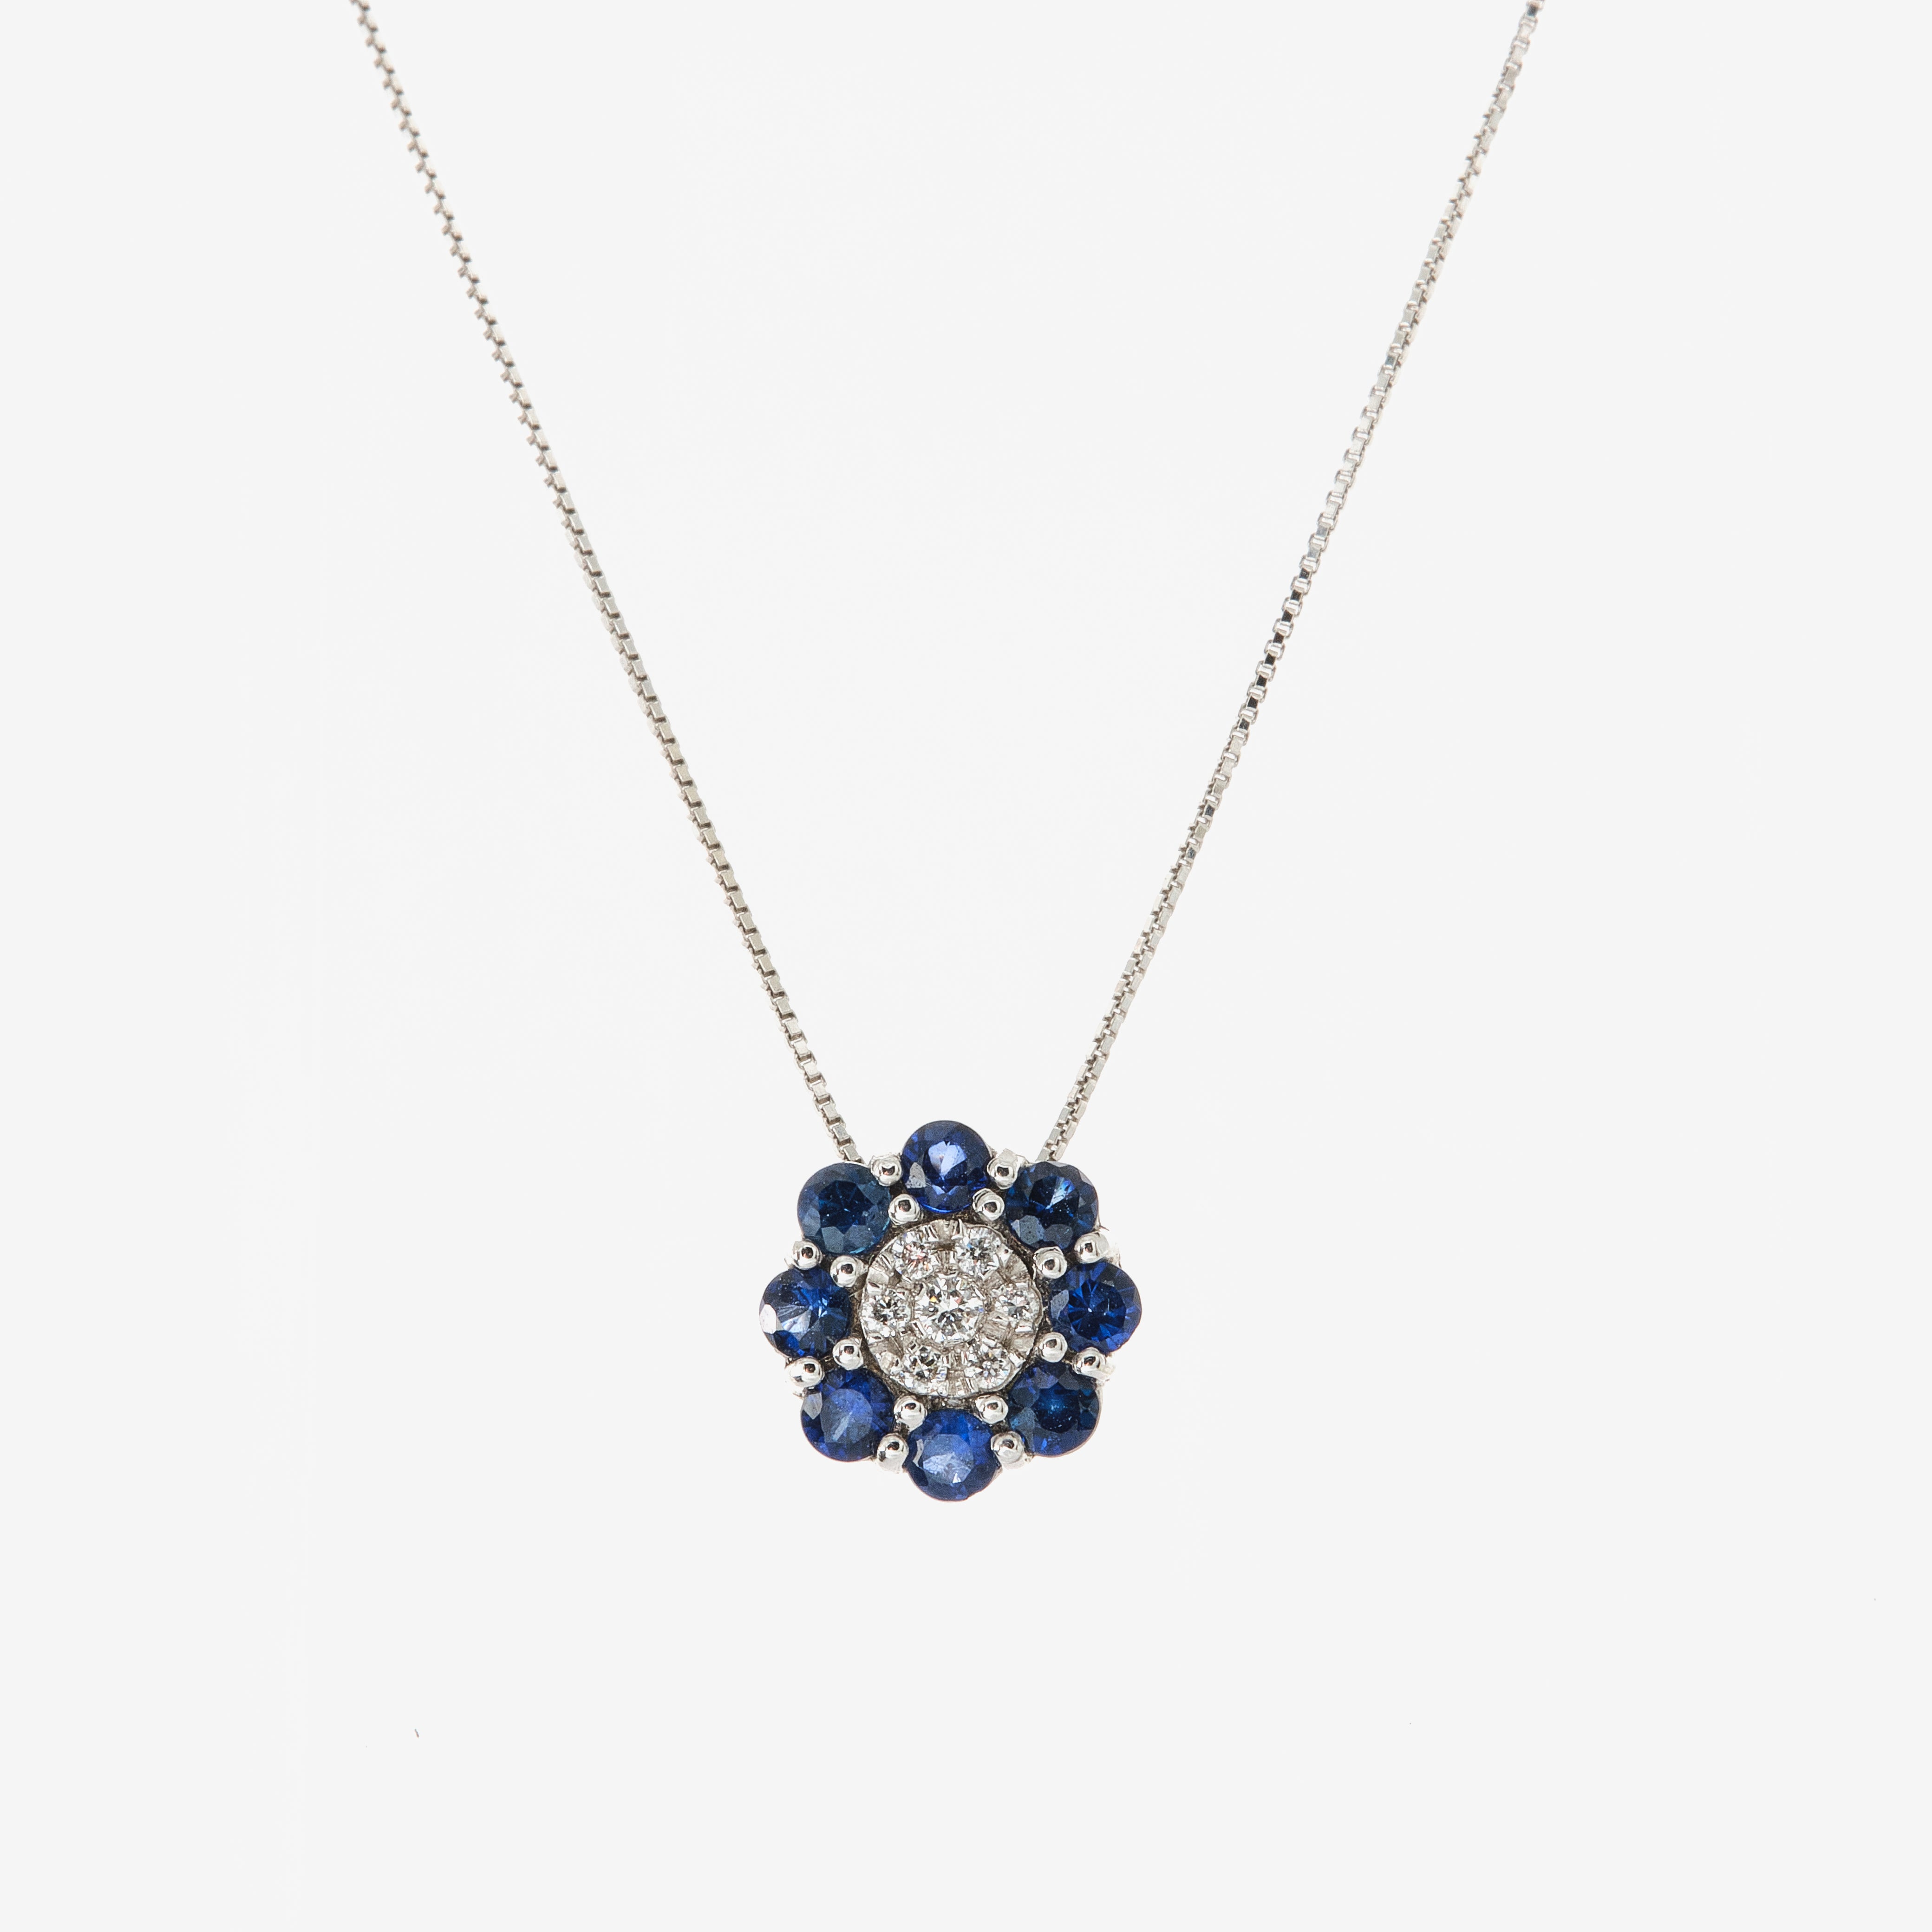 Flower necklace with sapphires and diamonds